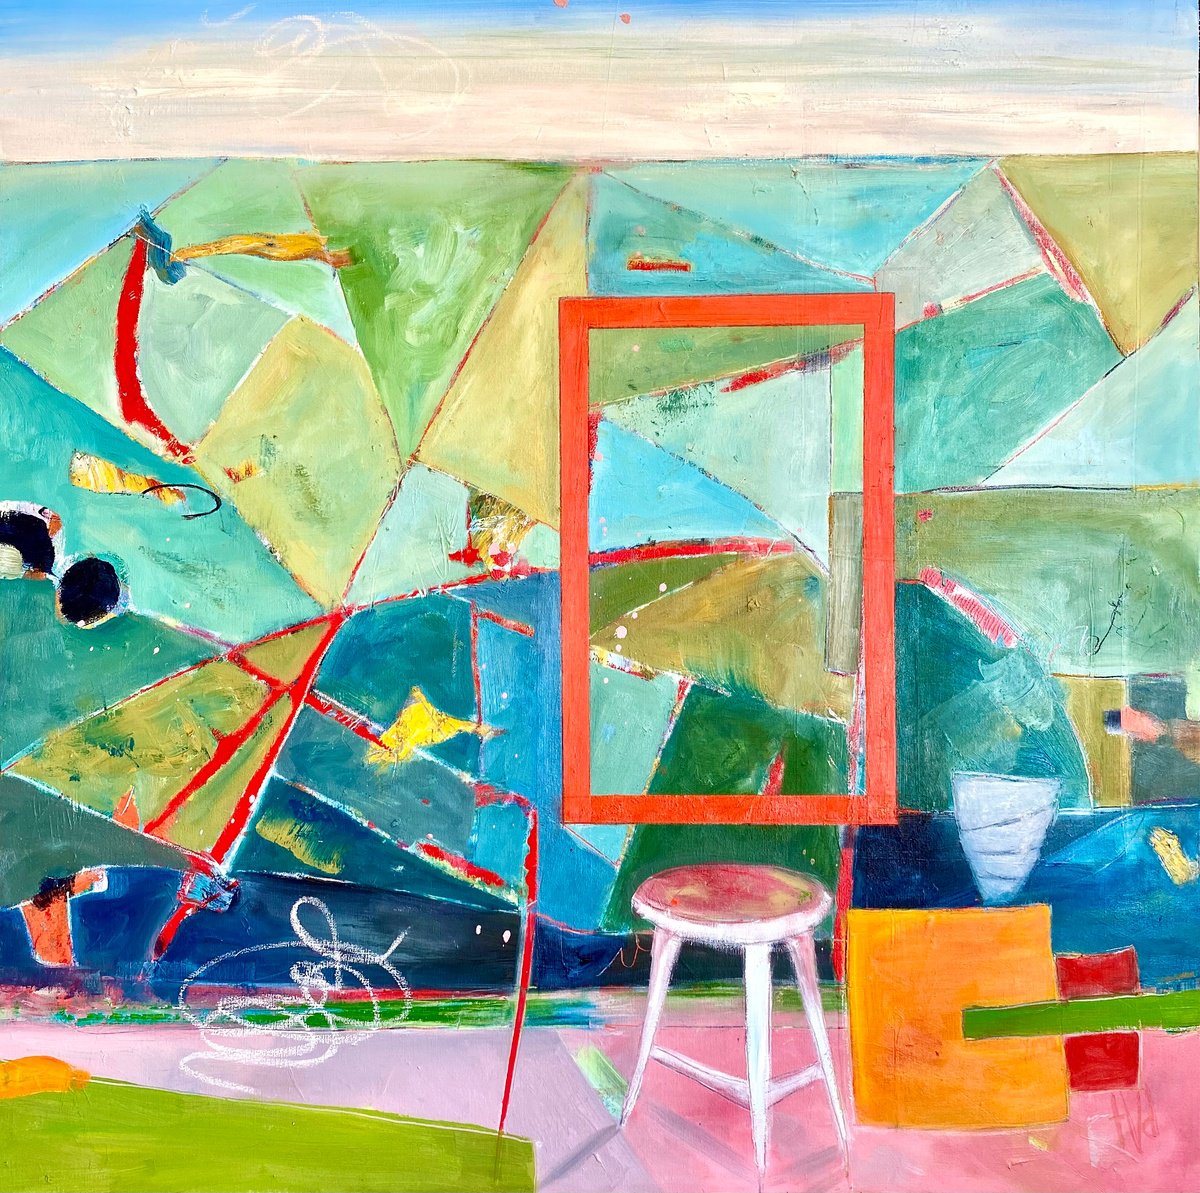 The Studio (Views & Vantage Points) by Theresa Vandenberg Donche